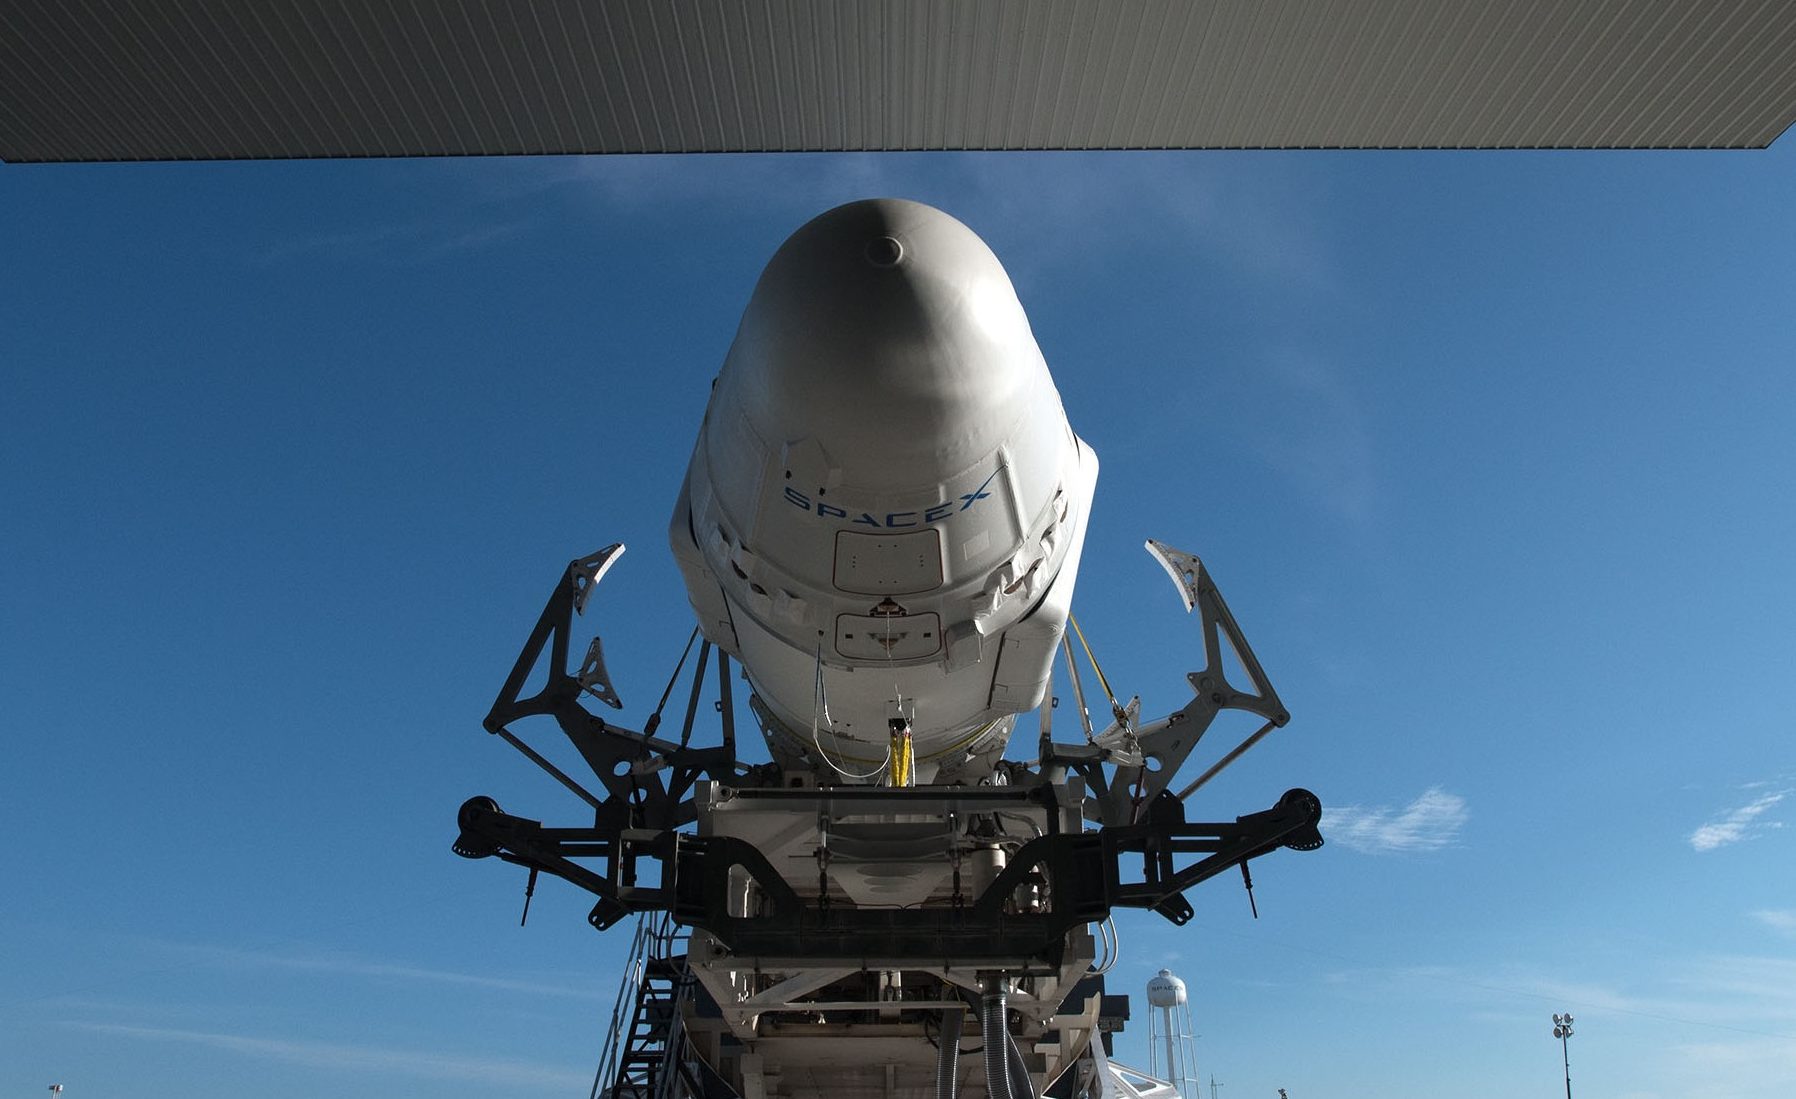 CRS-13 rollout (SpaceX)